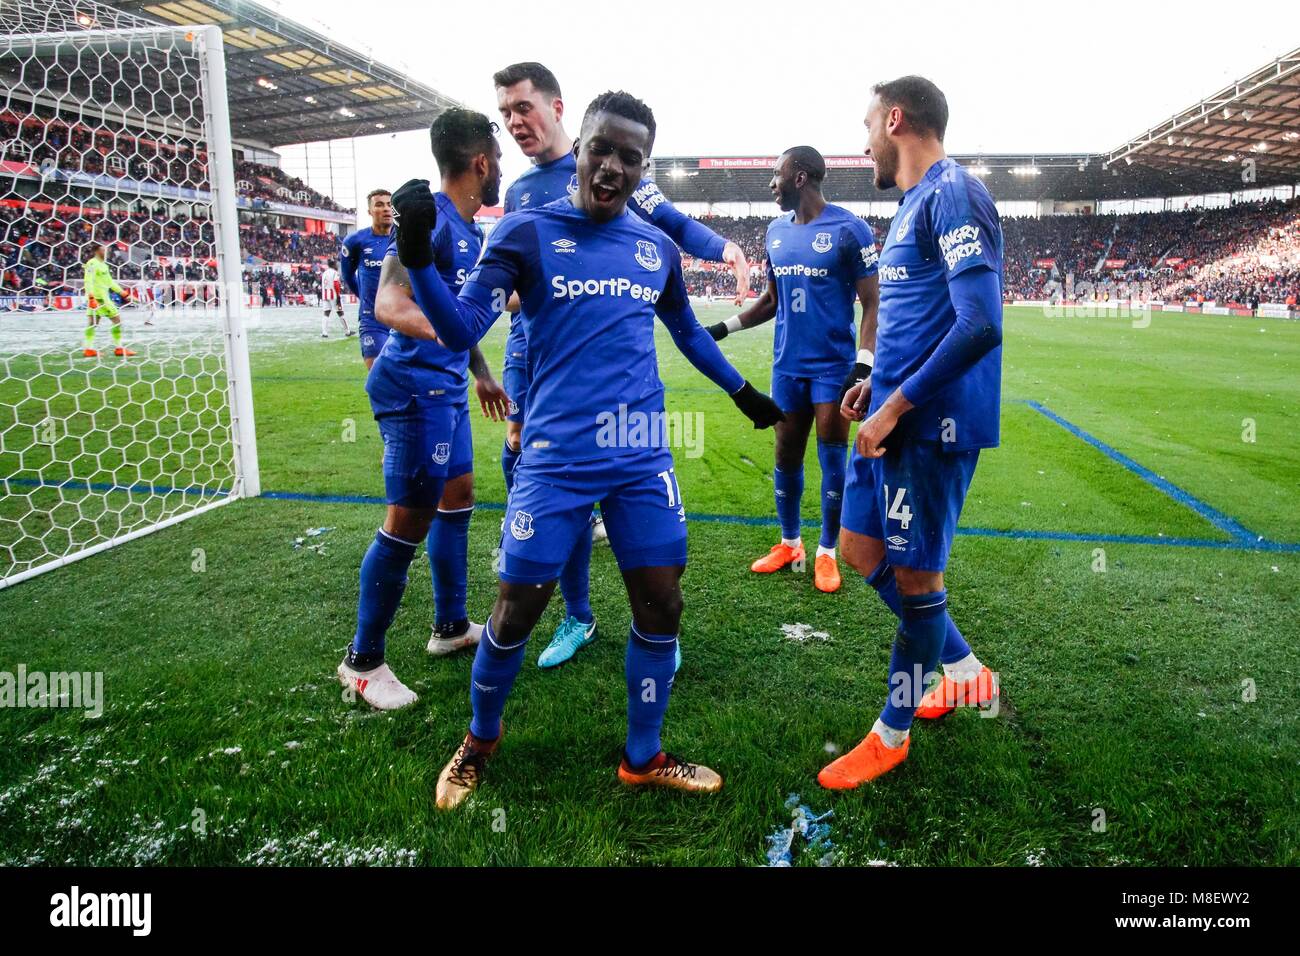 Stoke-on-Trent, UK, 17 Mar 2018. Idrissa Gueye of Everton celebrates his side's second goal to make the score 1-2 during the Premier League match between Stoke City and Everton at Bet365 Stadium on March 17th 2018 in Stoke-on-Trent, England. (Photo by Daniel Chesterton/phcimages.com) Stock Photo